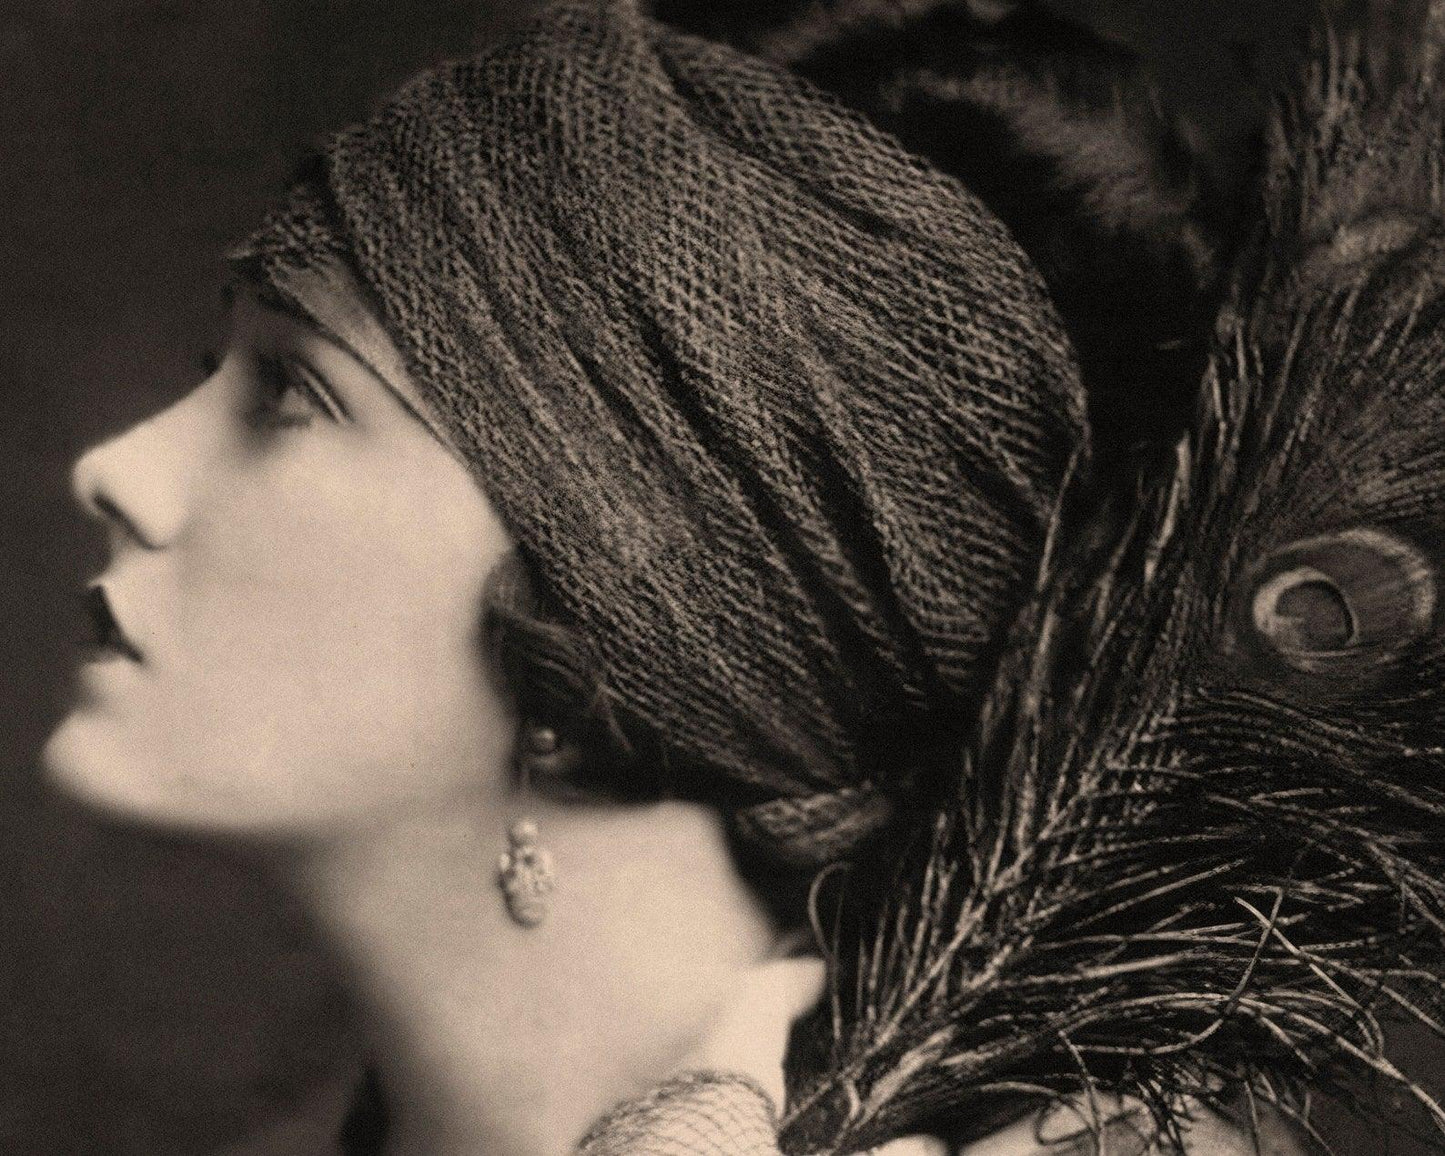 Gloria Swanson "Don't Change Your Husband" (c.1919) Silent Movie Promotional Photograph - Mabon Gallery